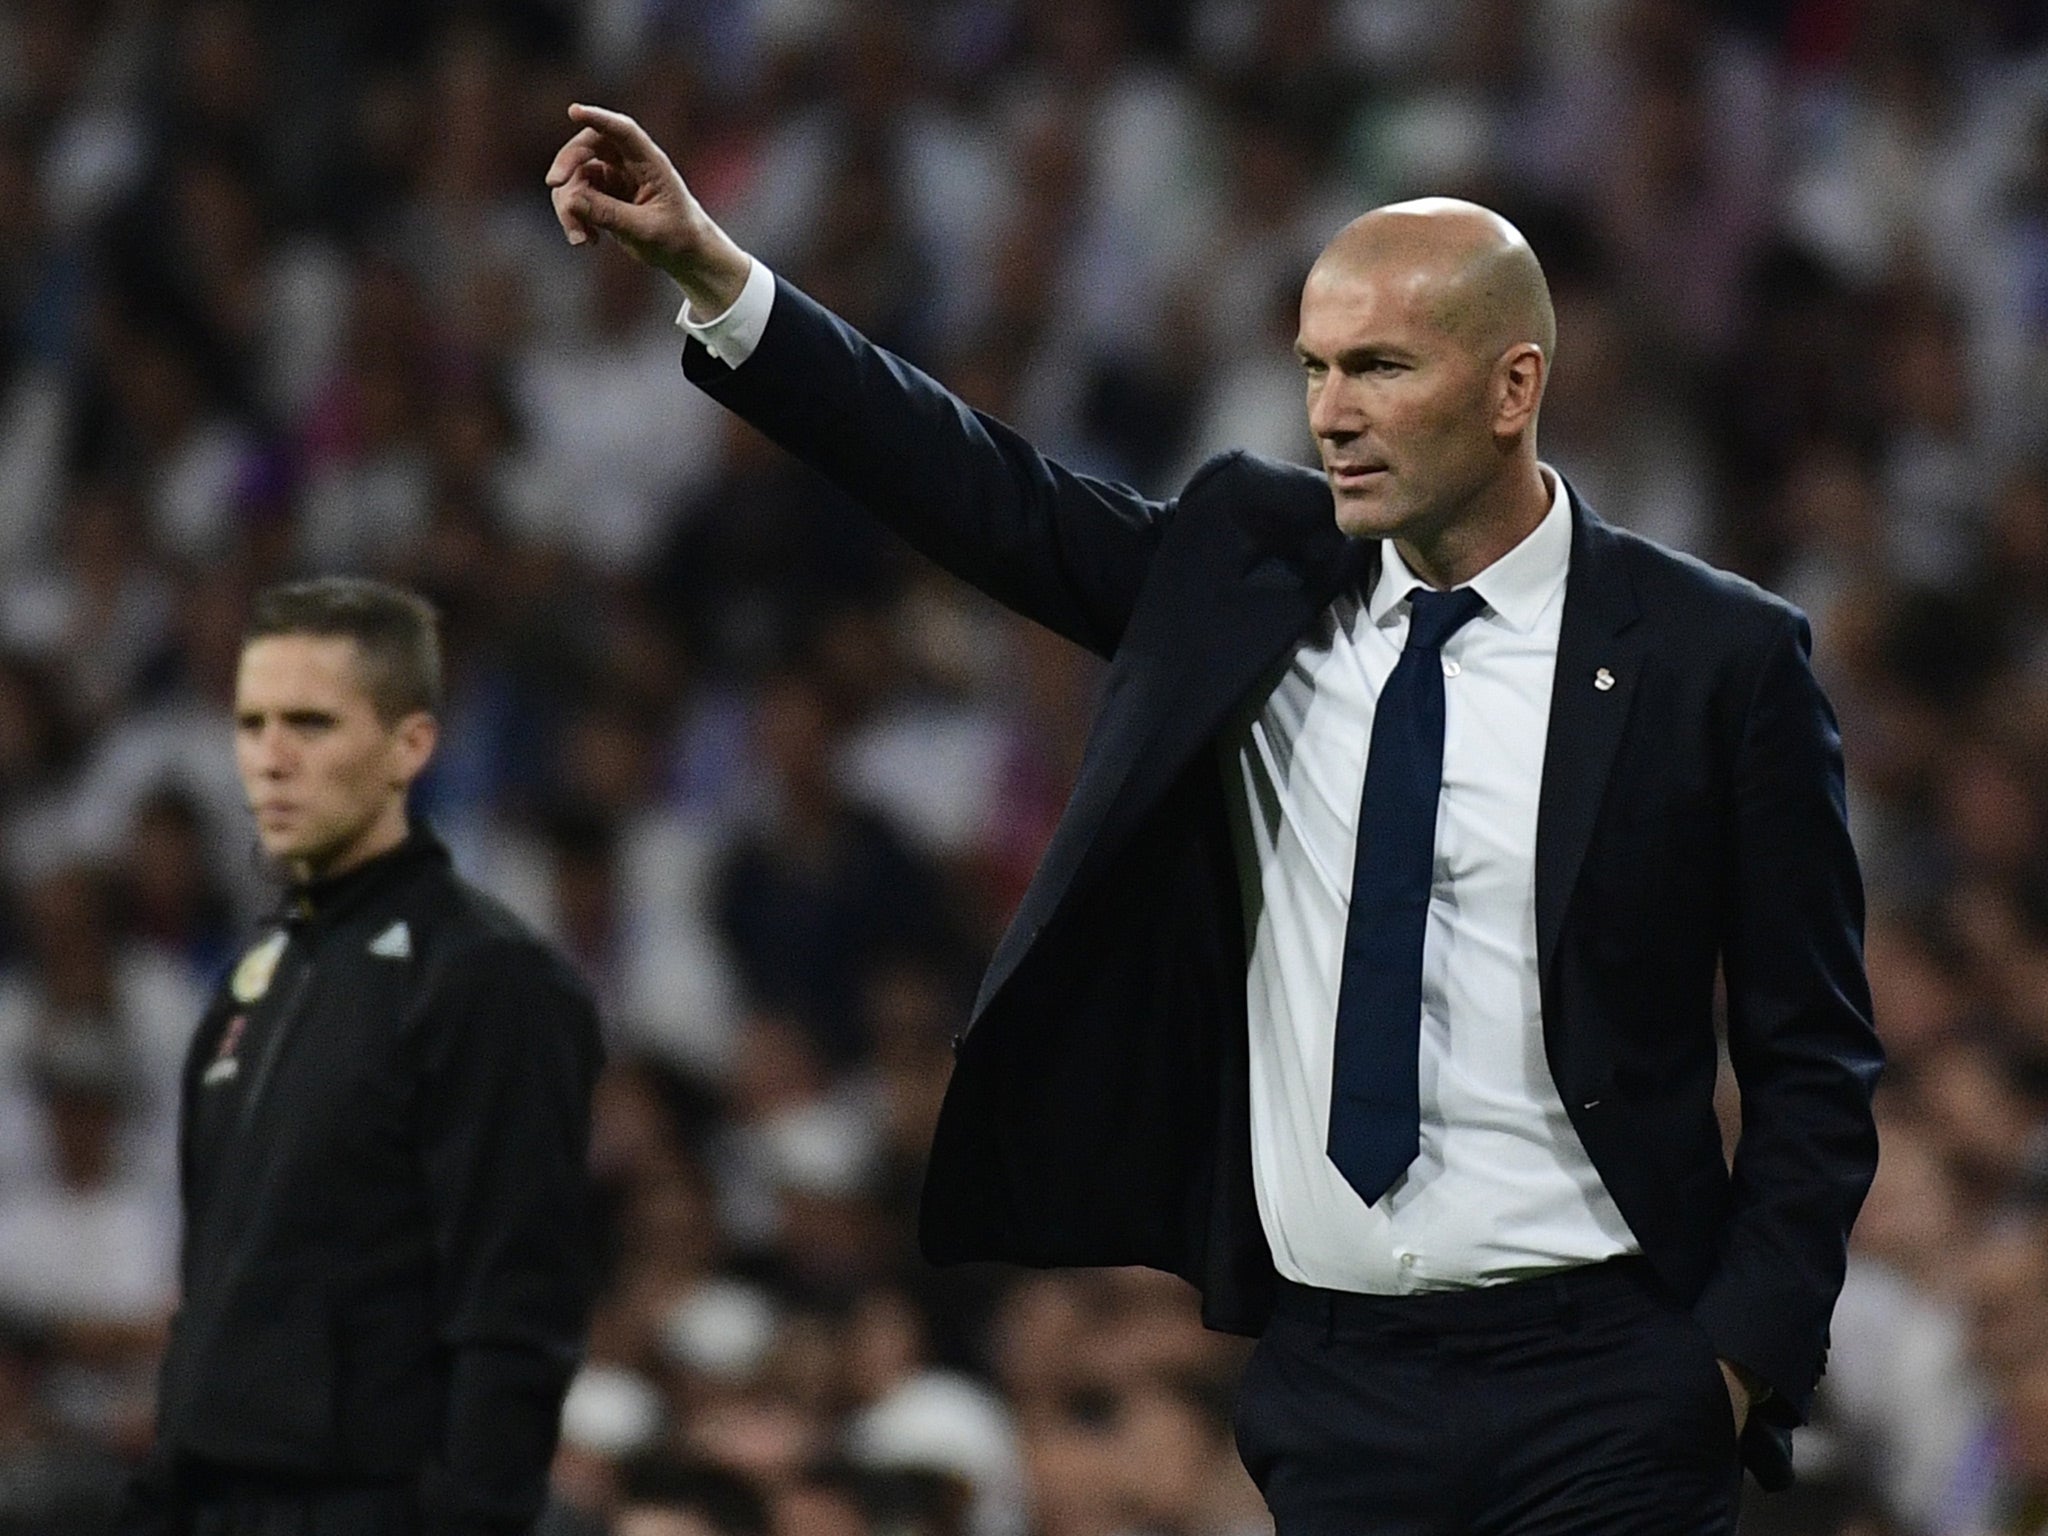 Zinedine Zidane remains confident that his side will seal the title